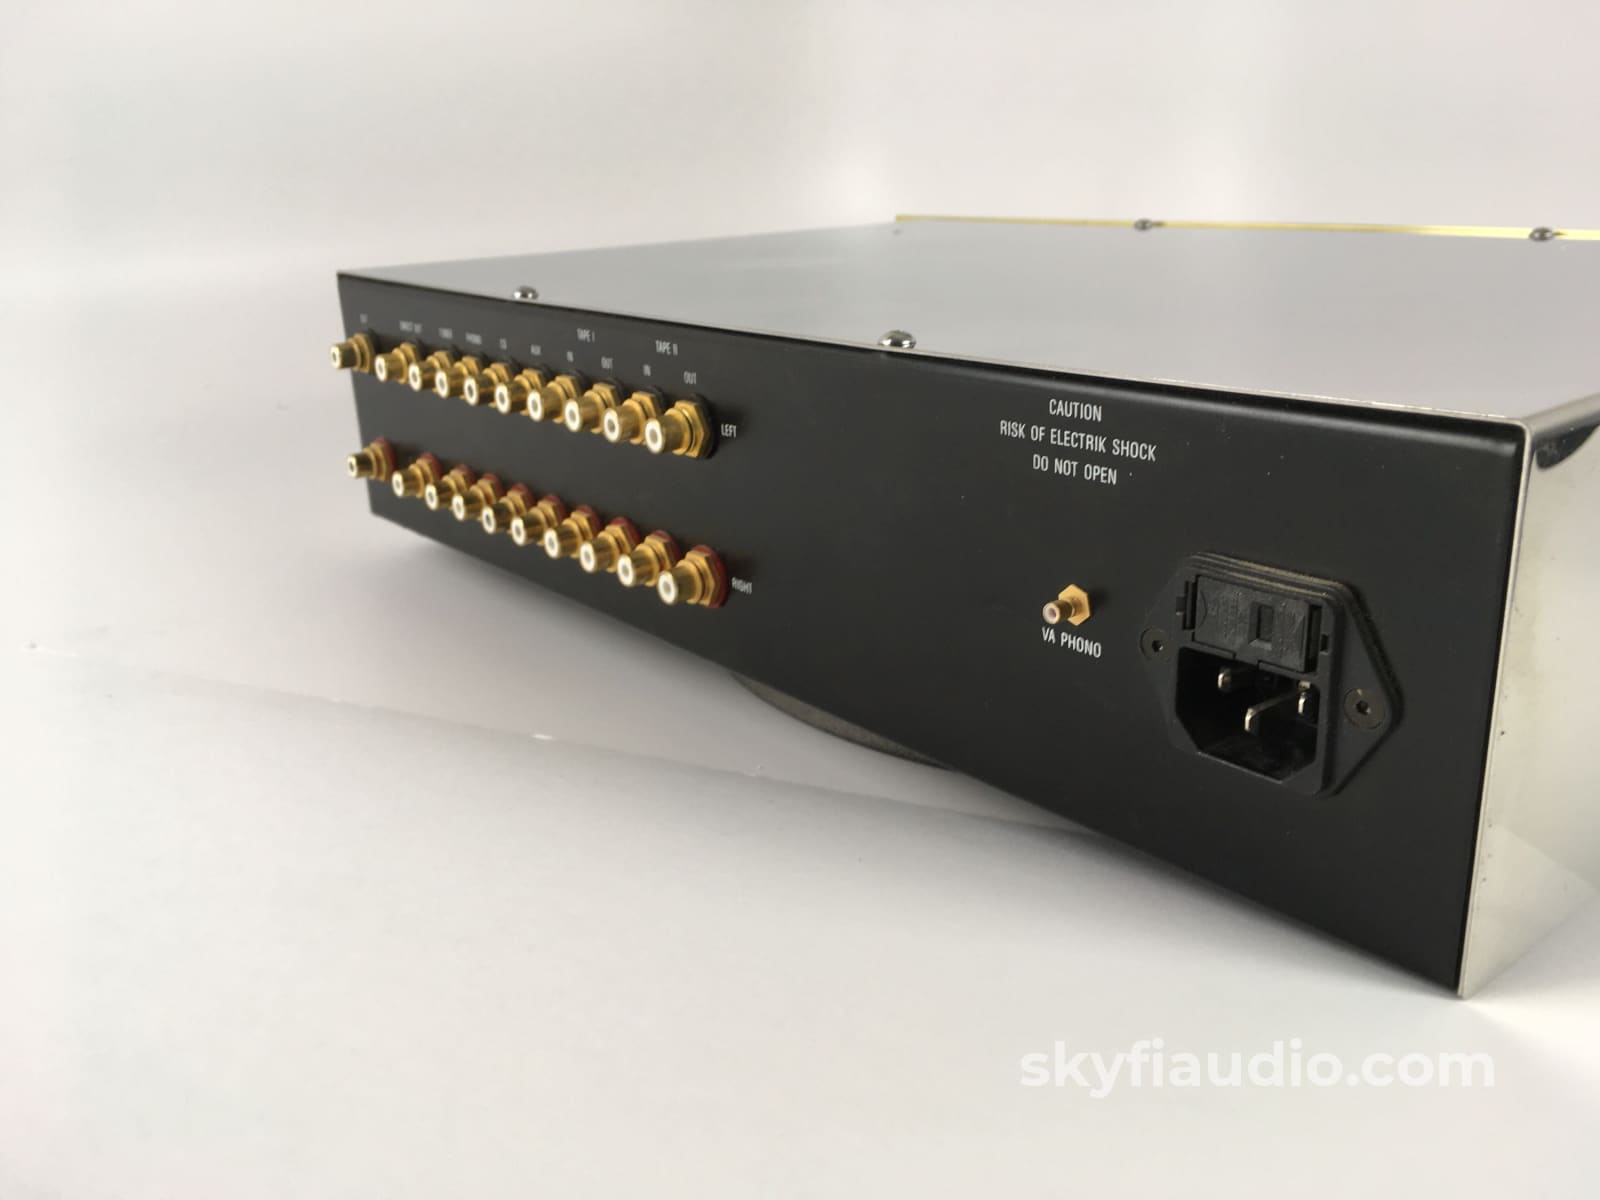 Ensemble Virtuoso Hybrid Tube and Solid State Preamp